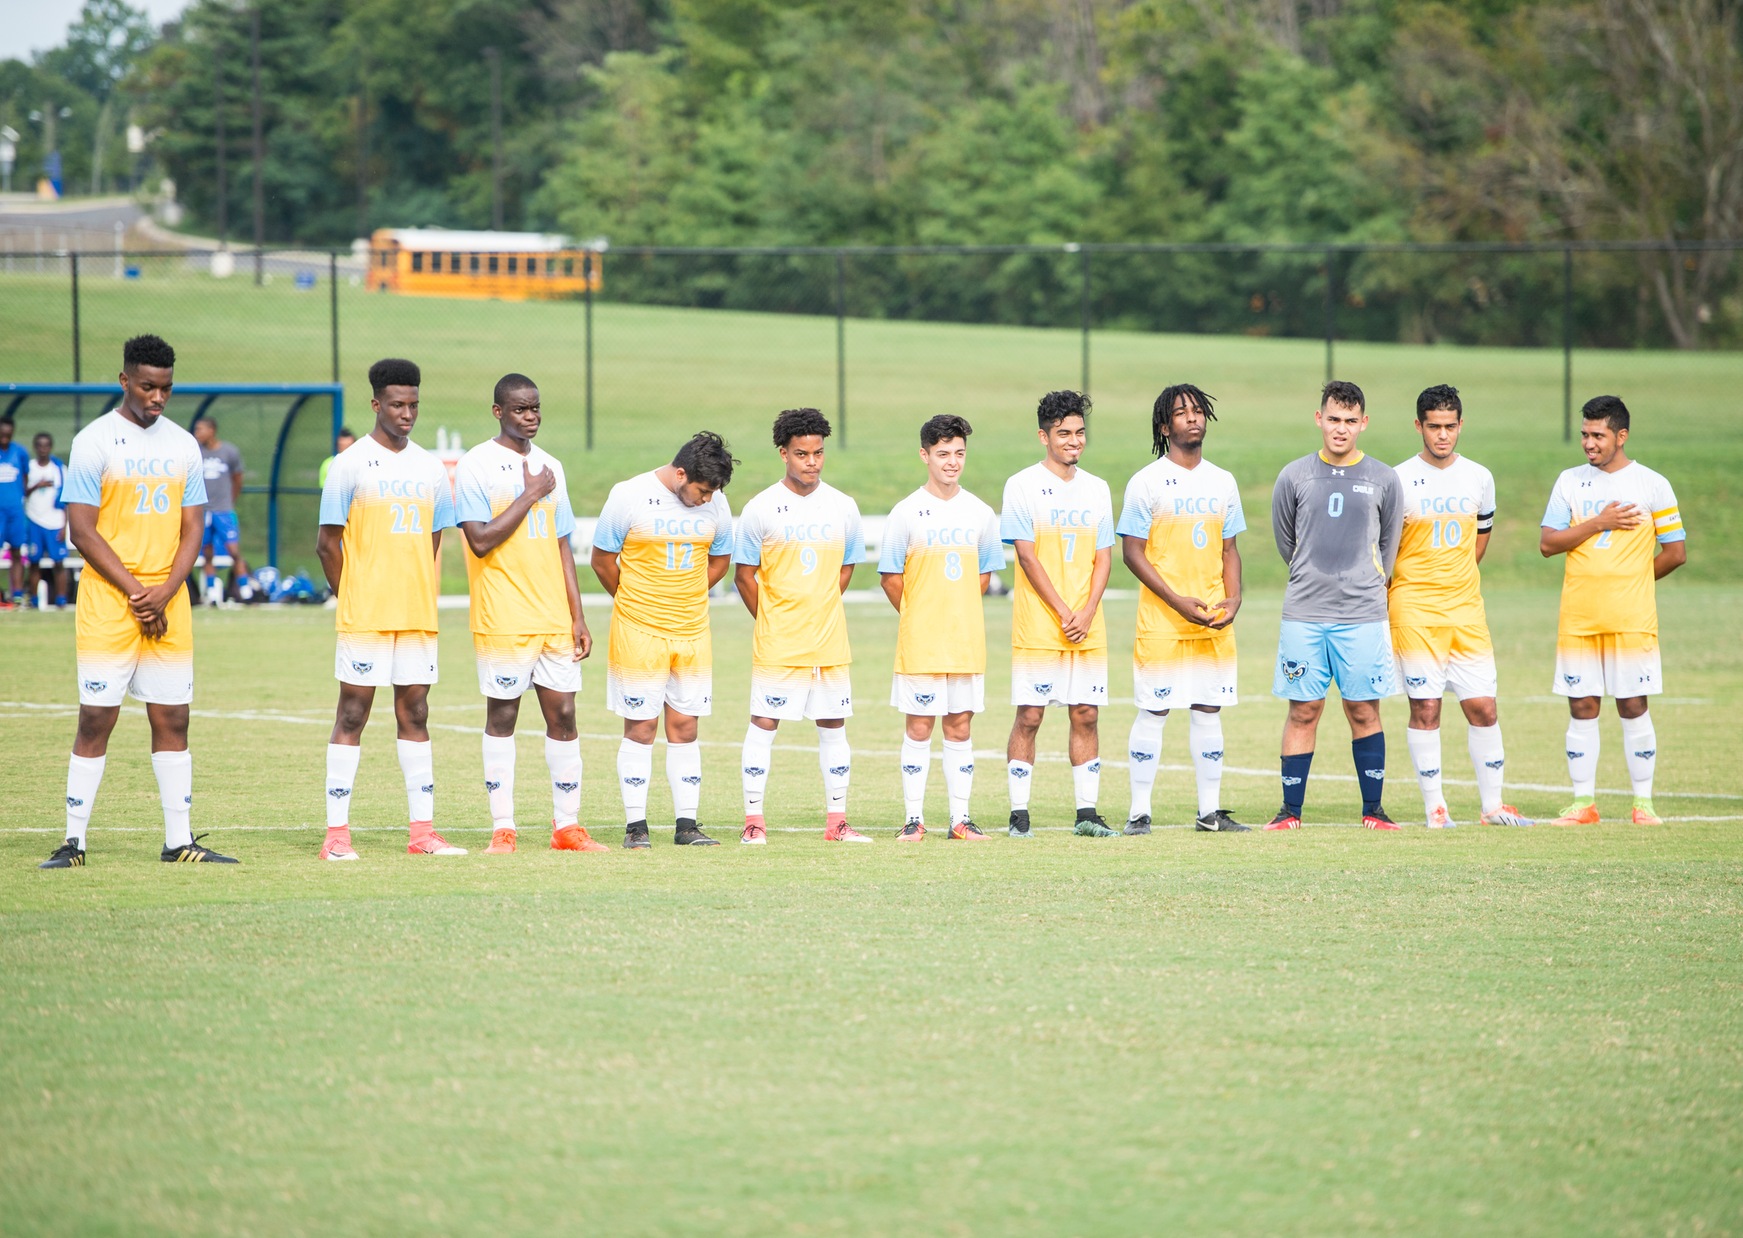 Prince George's Men's Soccer Ranked Ninth In NJCAA Division III Men's Soccer Rankings